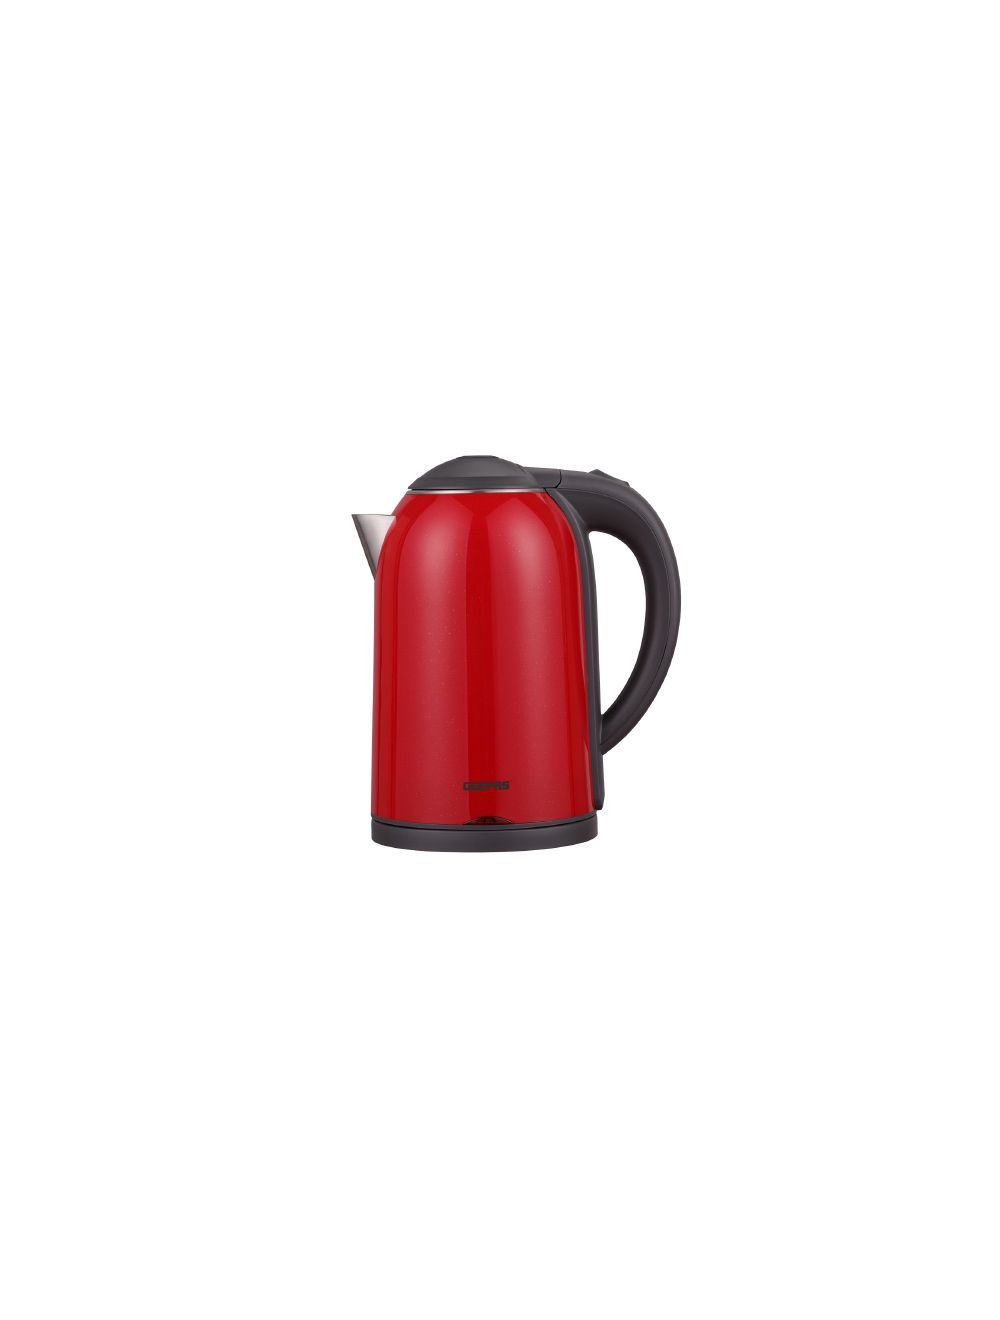 Geepas Double Layer Electric Kettle 1.7 Litres GK38013 Red/Black